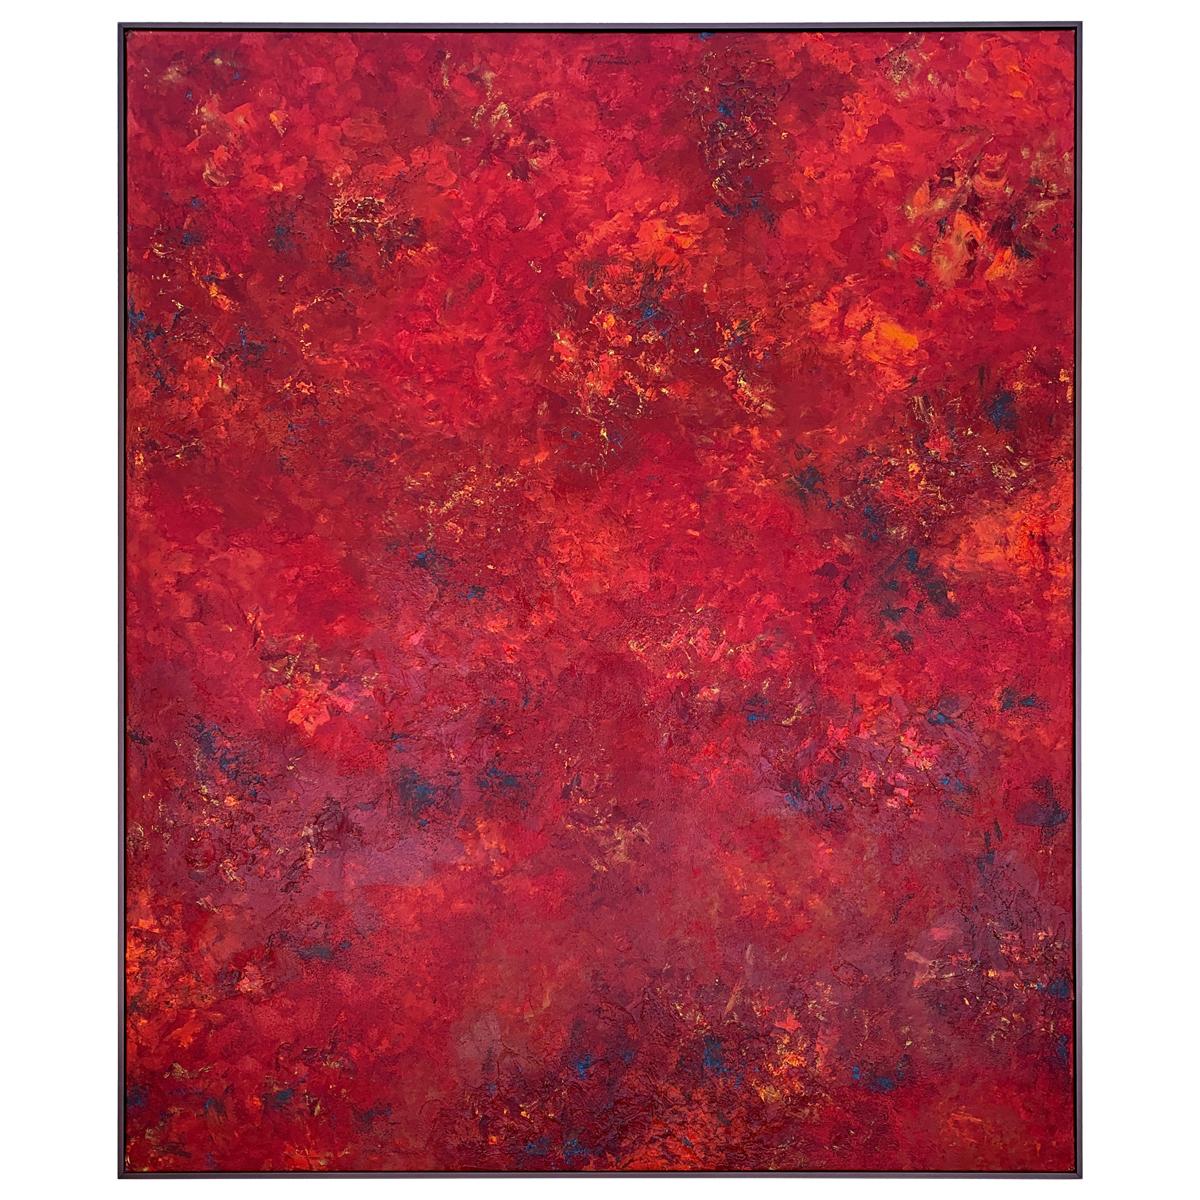 Vibrant Red Abstract "Pompeii"